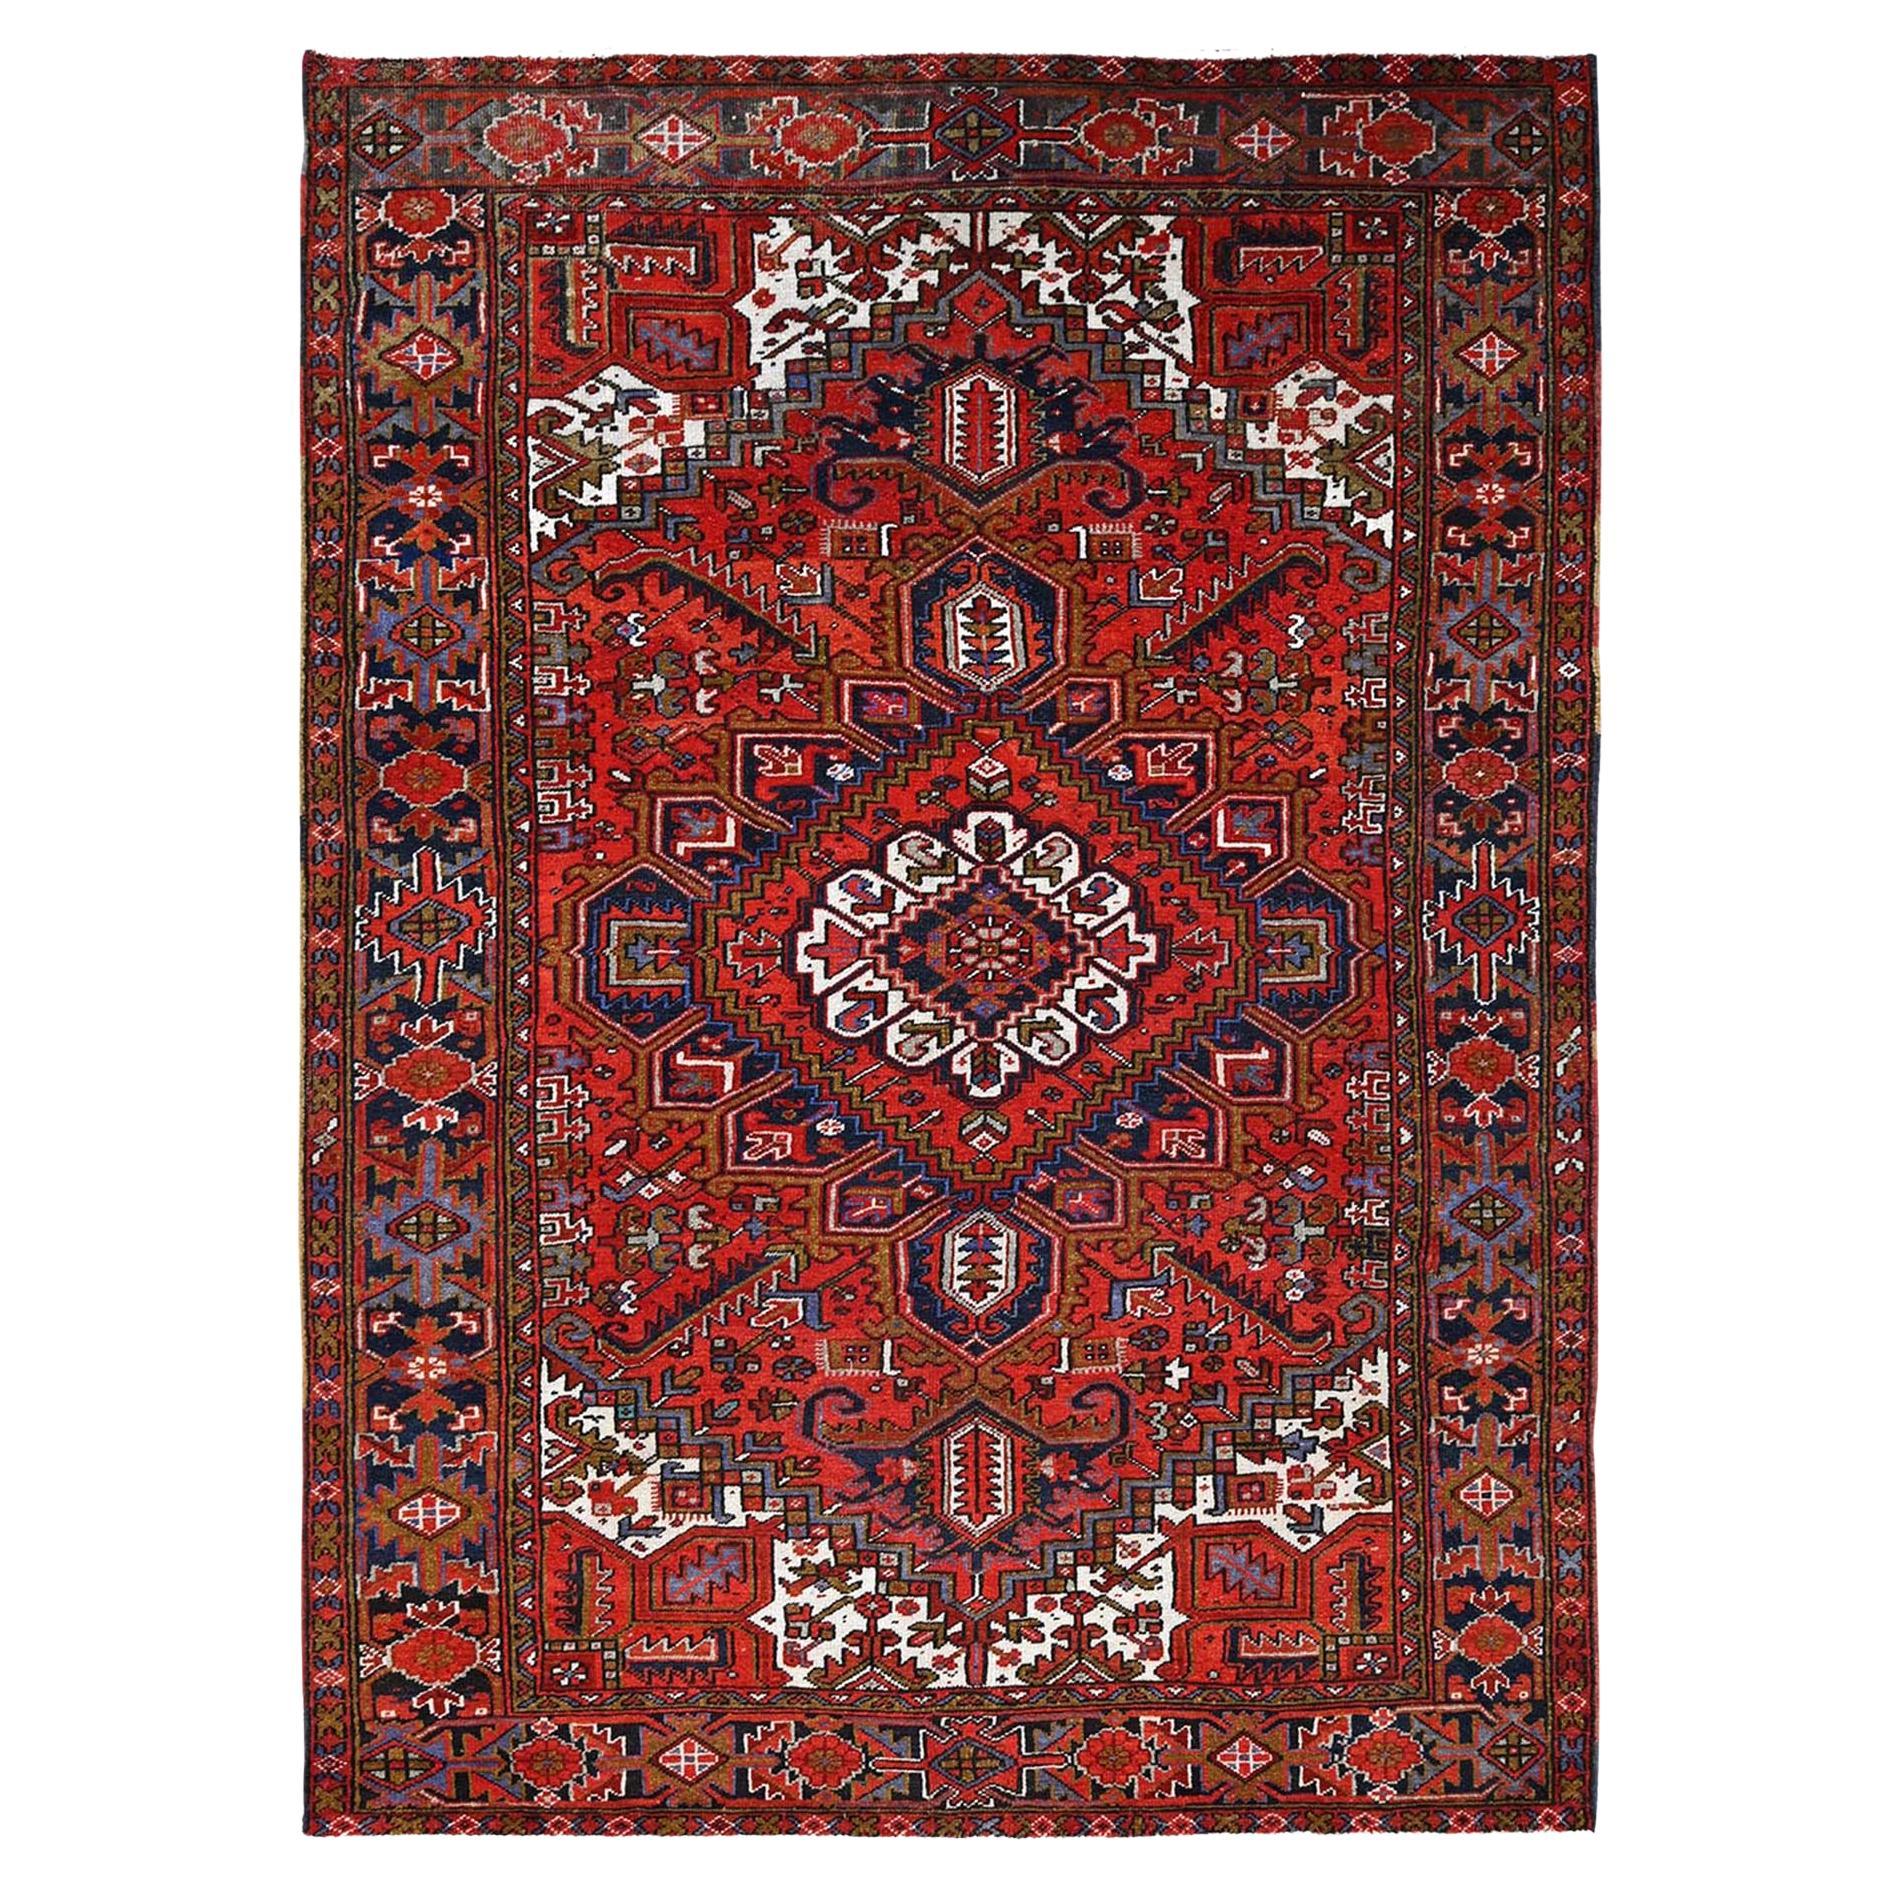 Raspberry Red Worn Wool Hand Knotted Semi Antique Persian Heriz Rustic Feel Rug